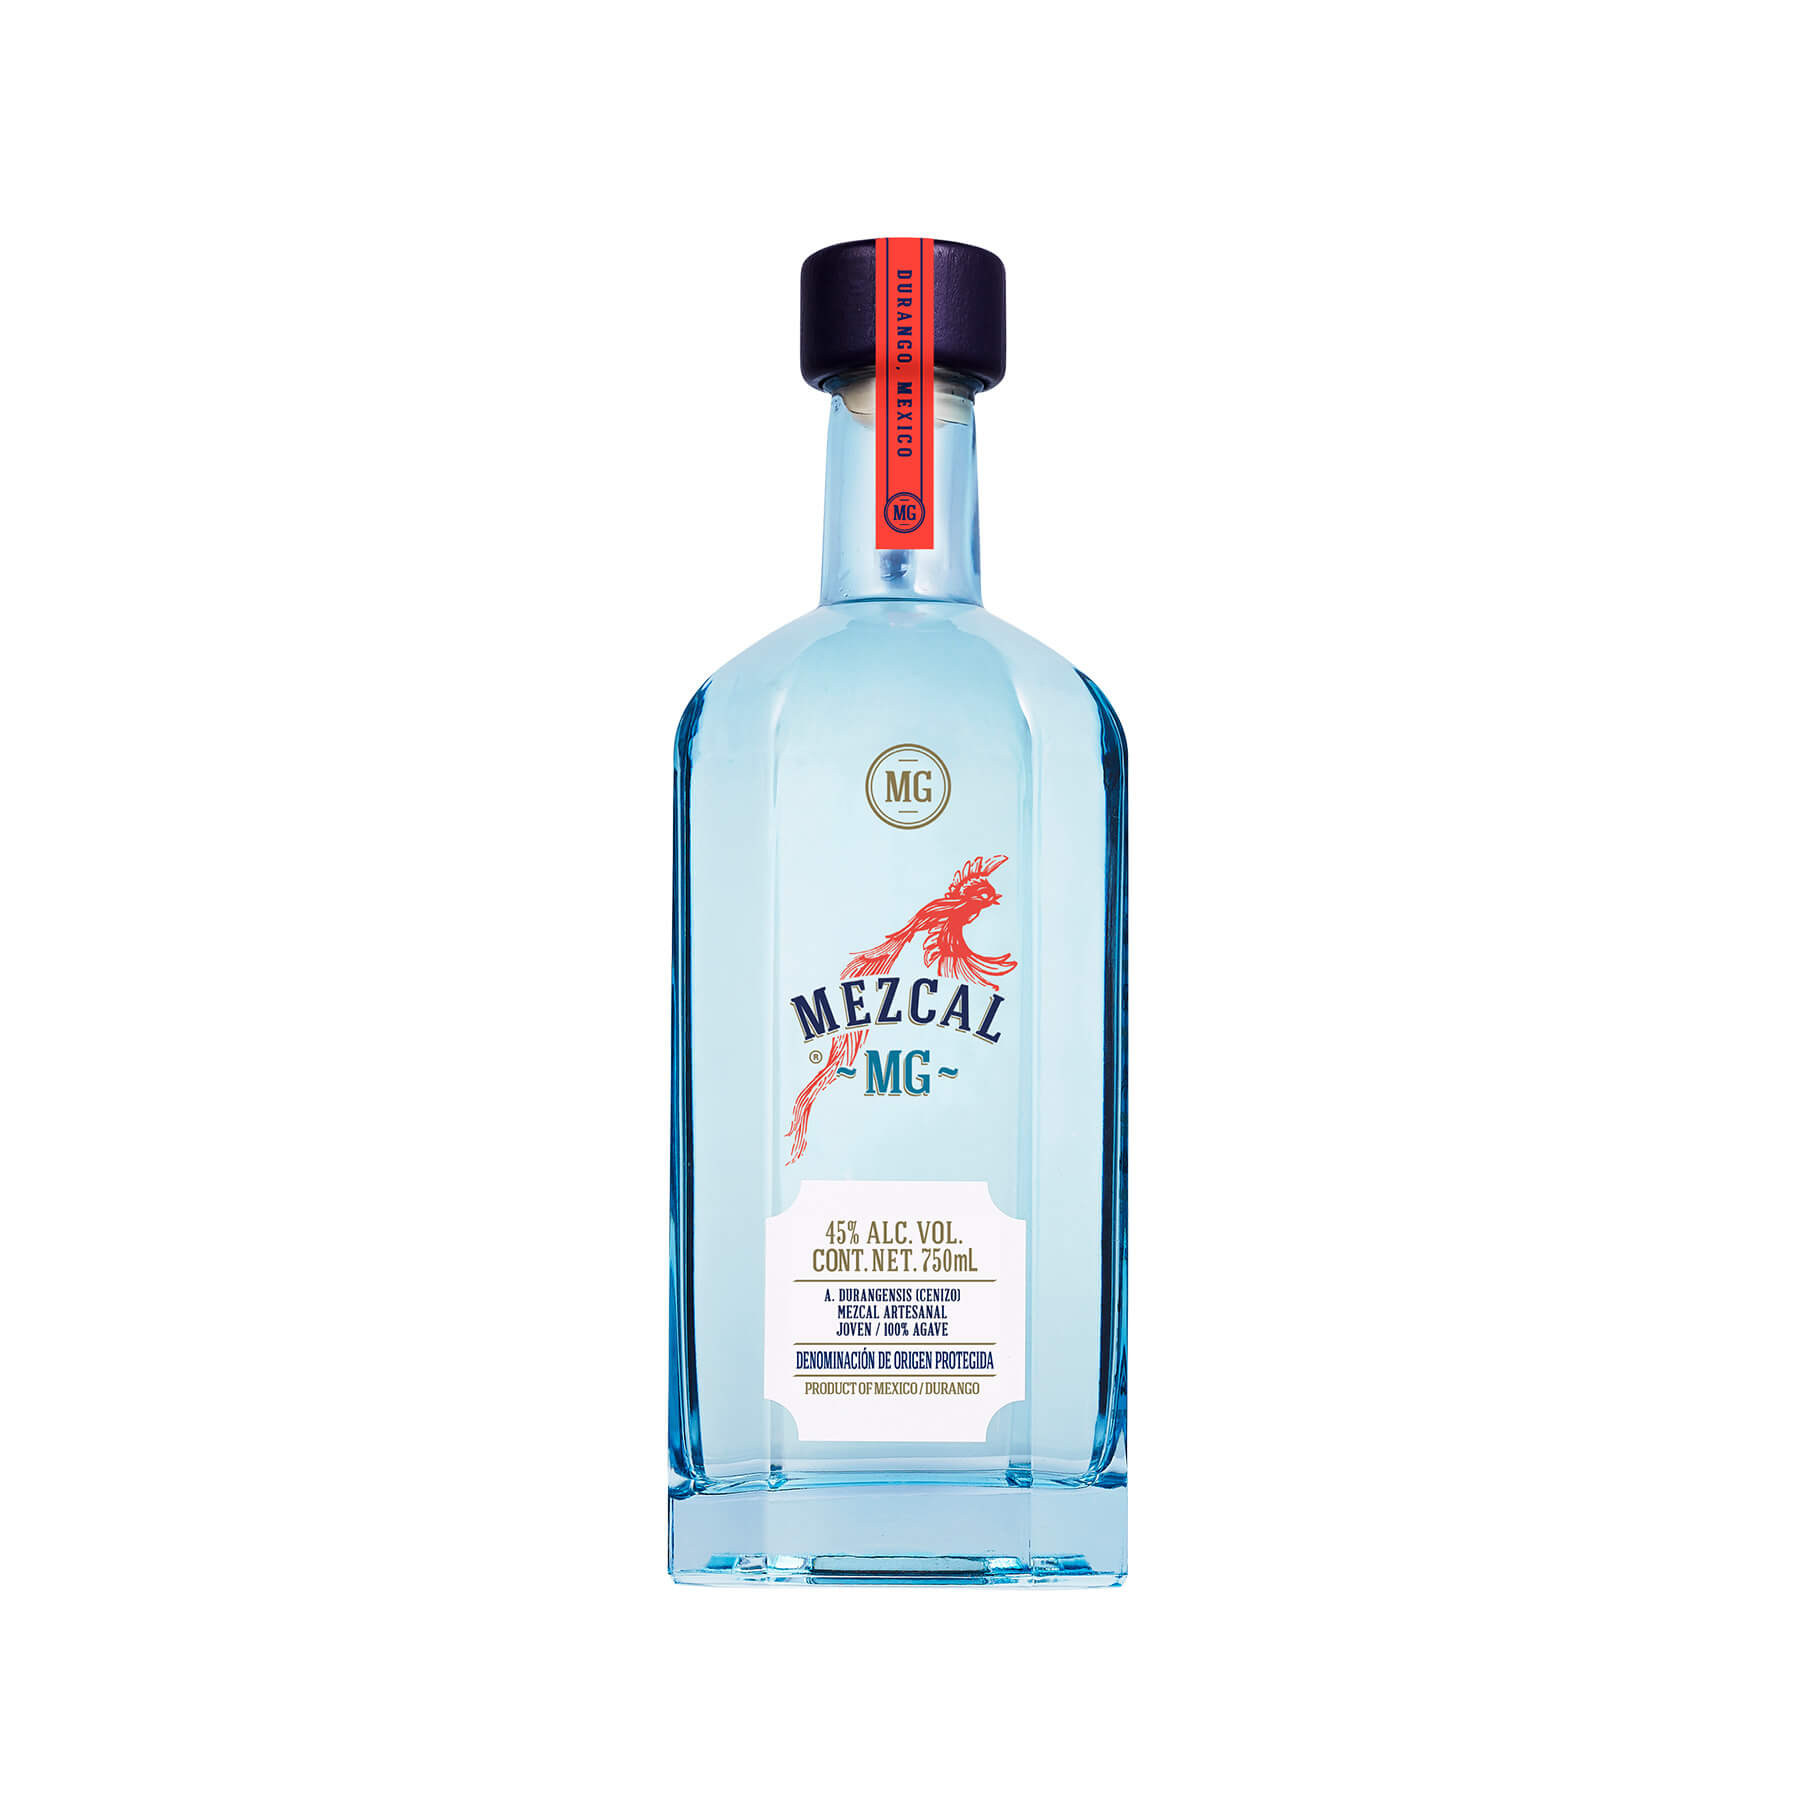 Featured image for “MG Mezcal Gin”